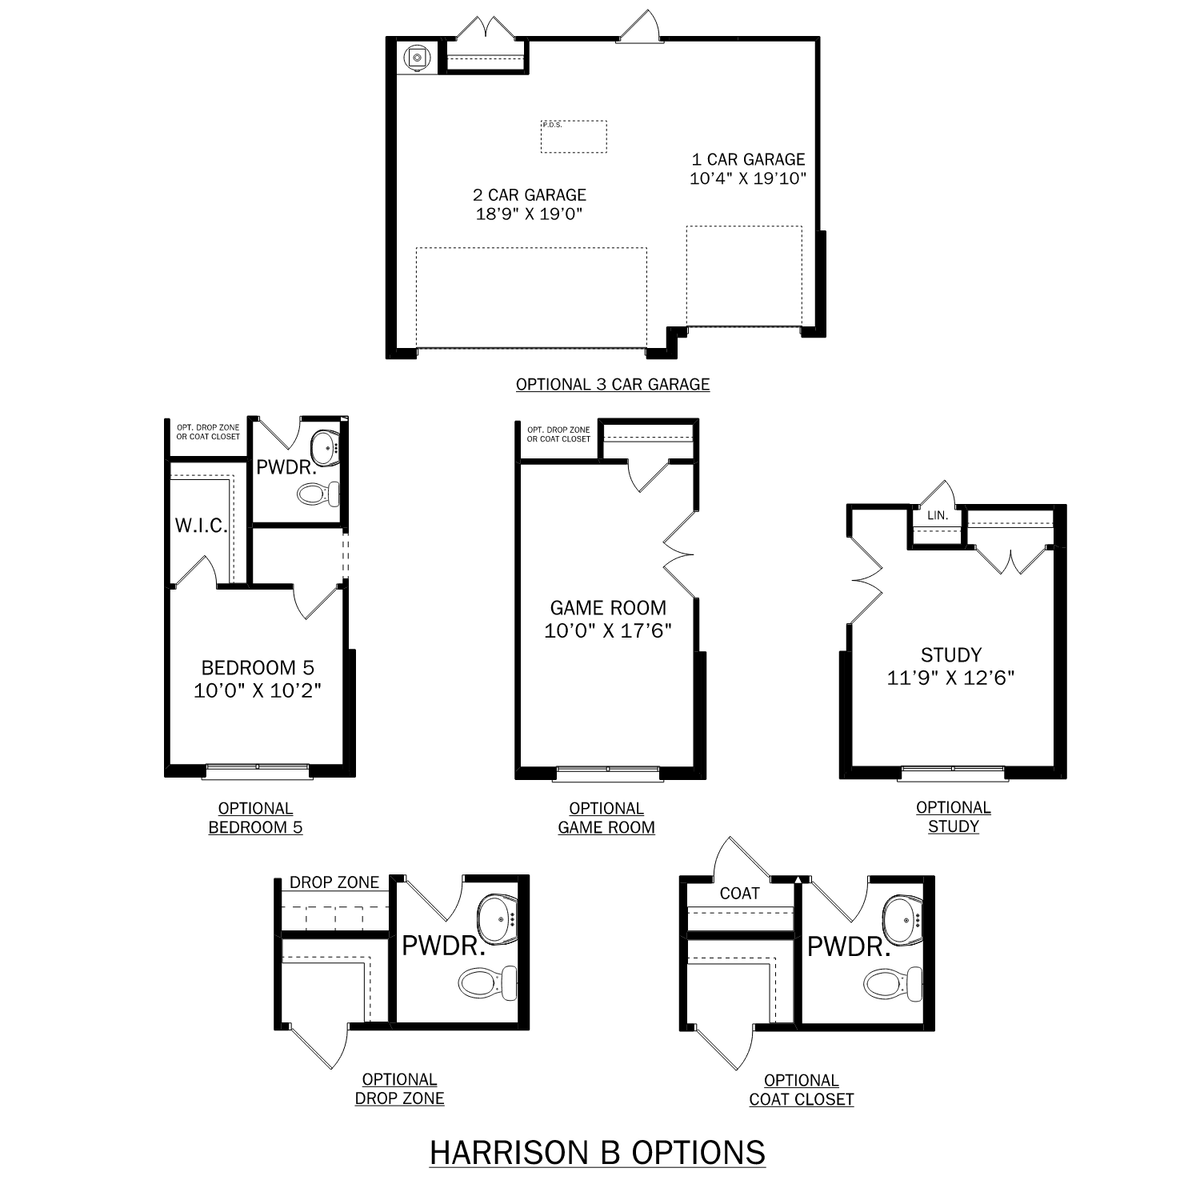 2 - The Harrison B buildable floor plan layout in Davidson Homes' Cain Park community.